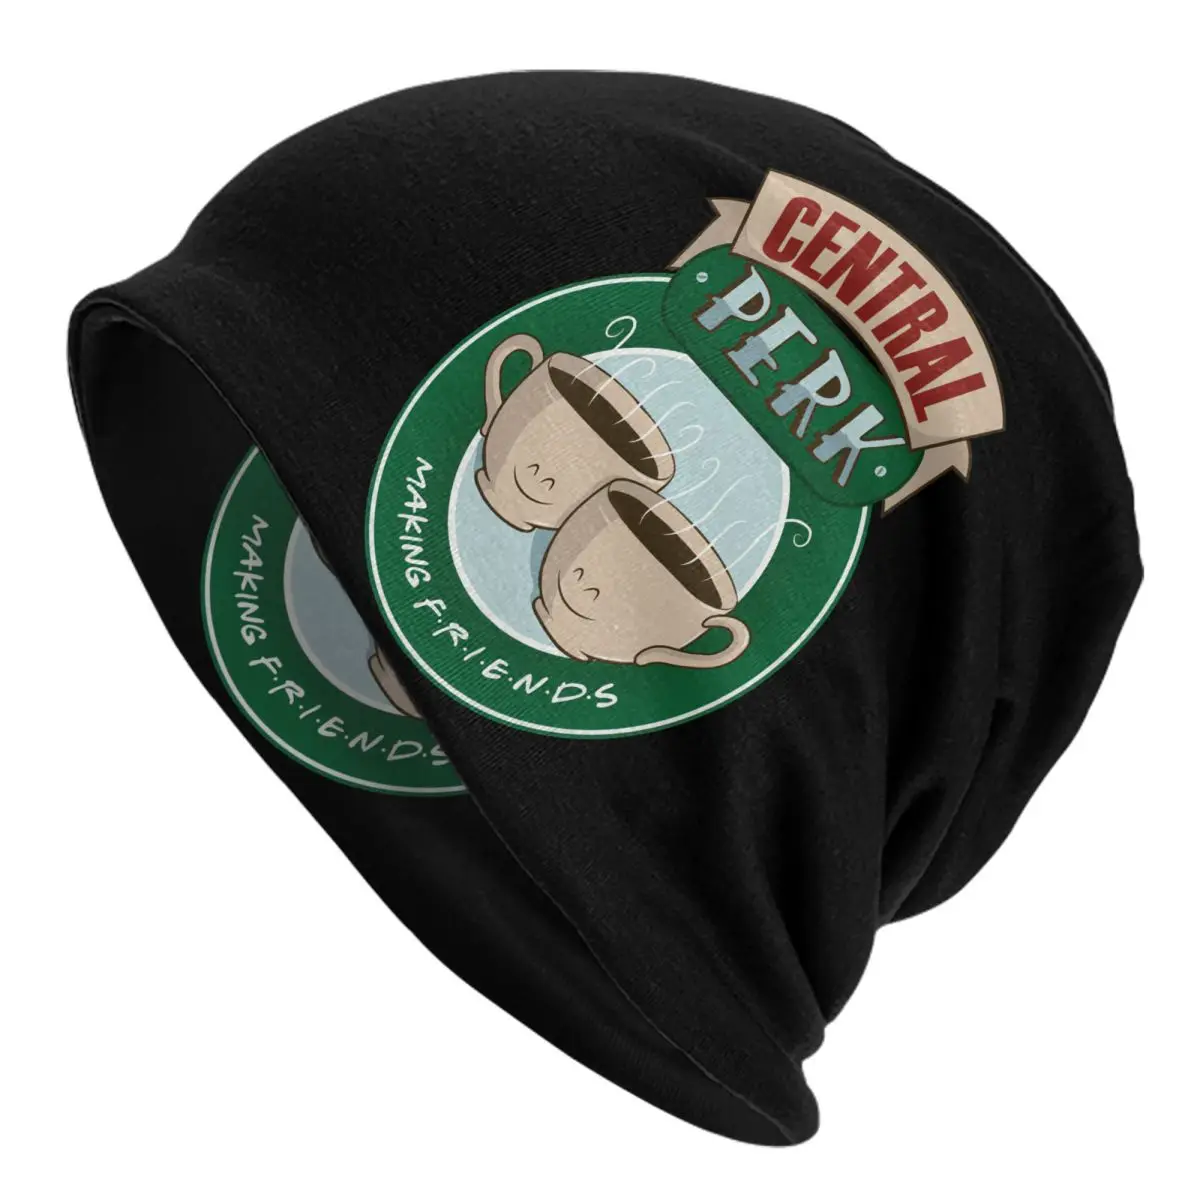 Central Perk Friends Adult Men's Women's Knit Hat Keep warm winter Funny knitted hat